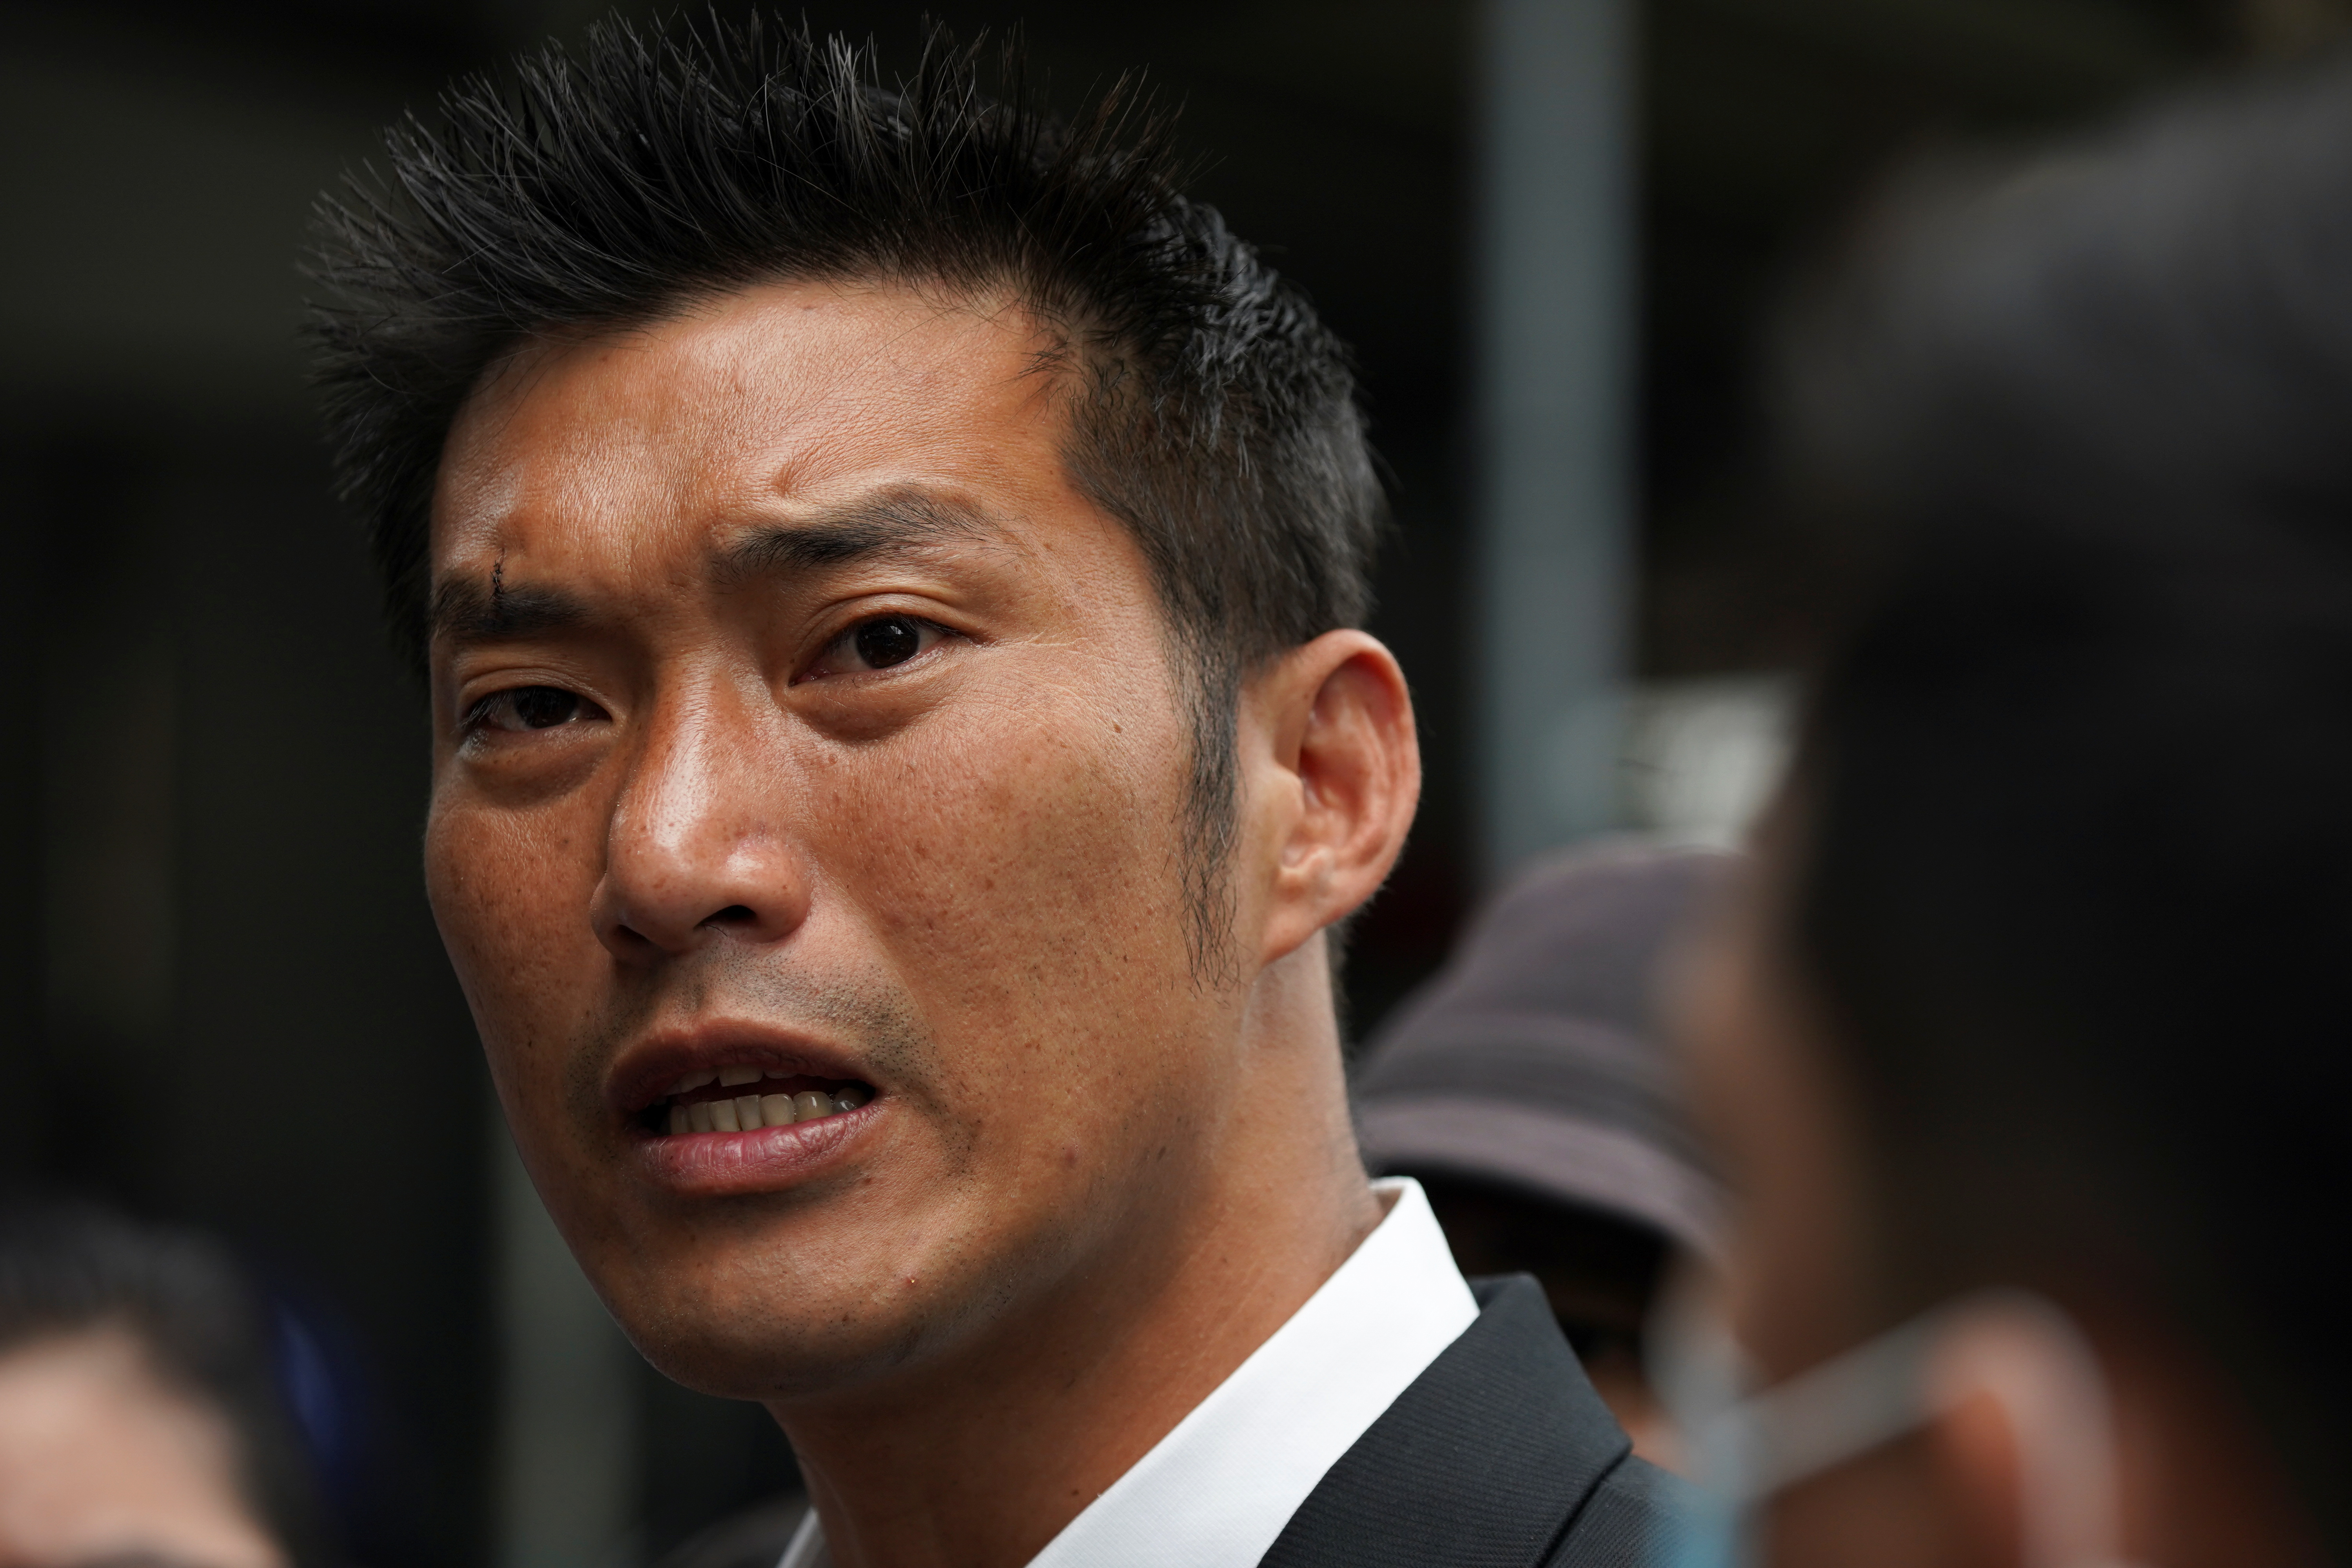 Banned opposition politician Thanathorn Juangroongruangkit turns up at a police station after police charged him with defaming the monarchy, in Bangkok